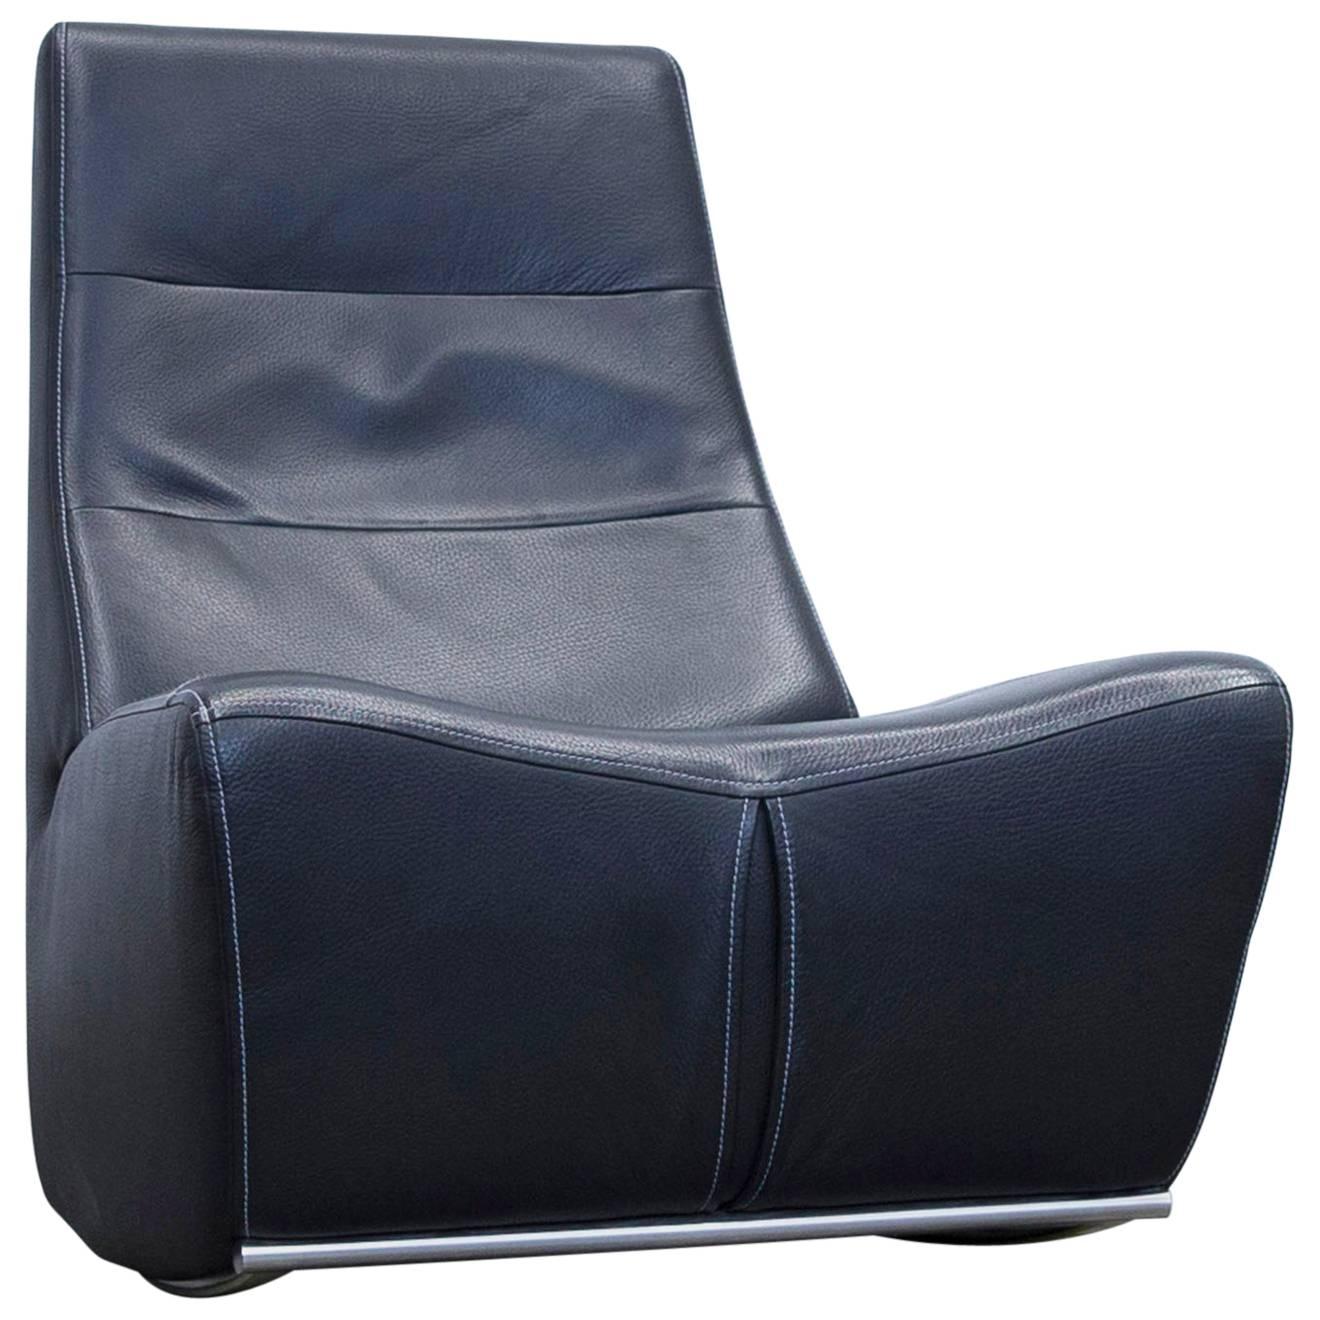 Himolla Maximilian Designer Chair Leather Black Relax One-Seat Couch Modern